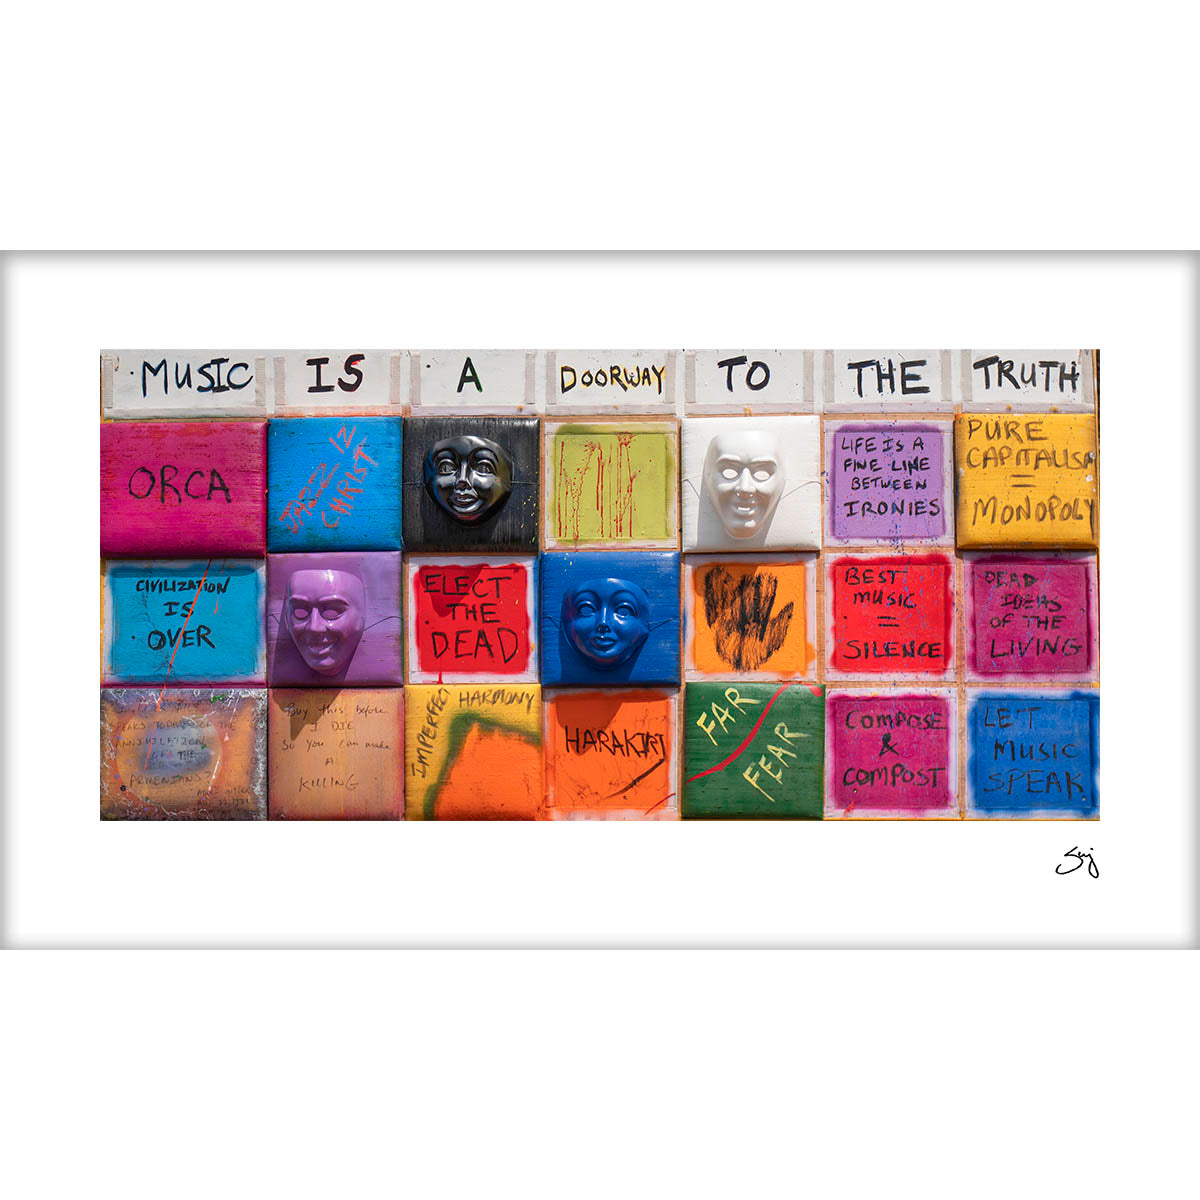 Music Is A Doorway To The Truth - Signed Limited Edition Poster